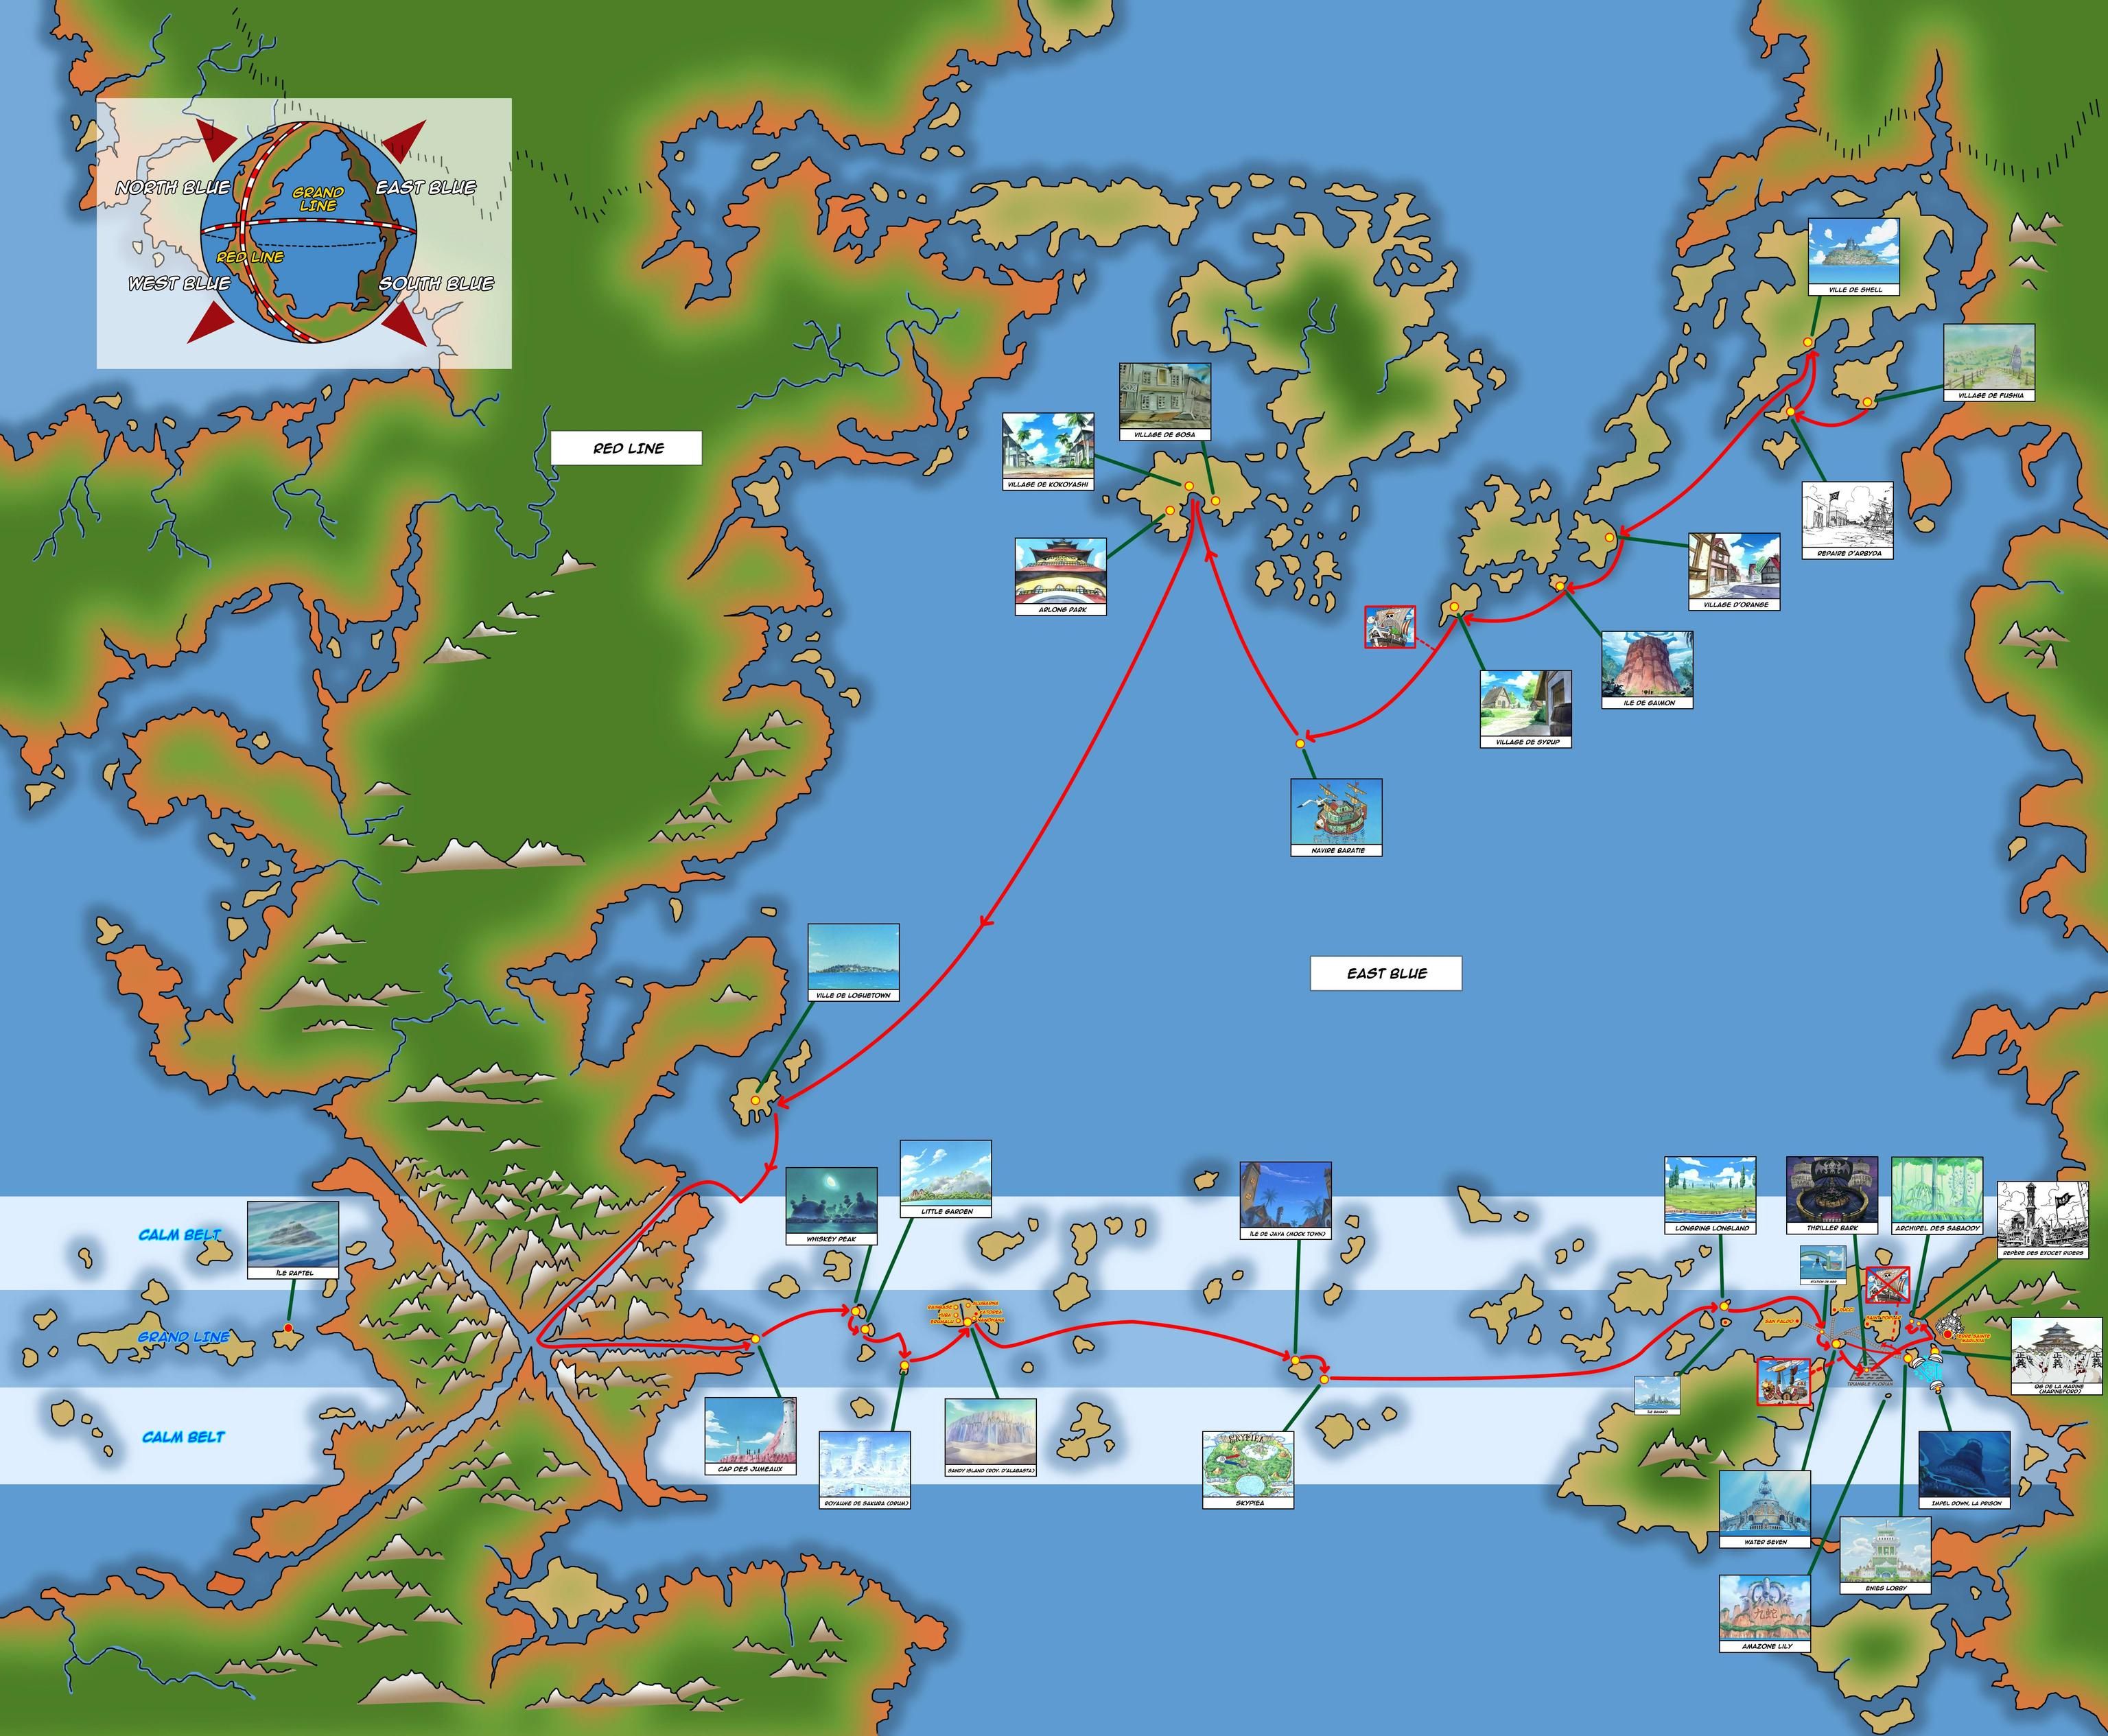 map of the op world | Blue one piece, One piece world, One piece new world